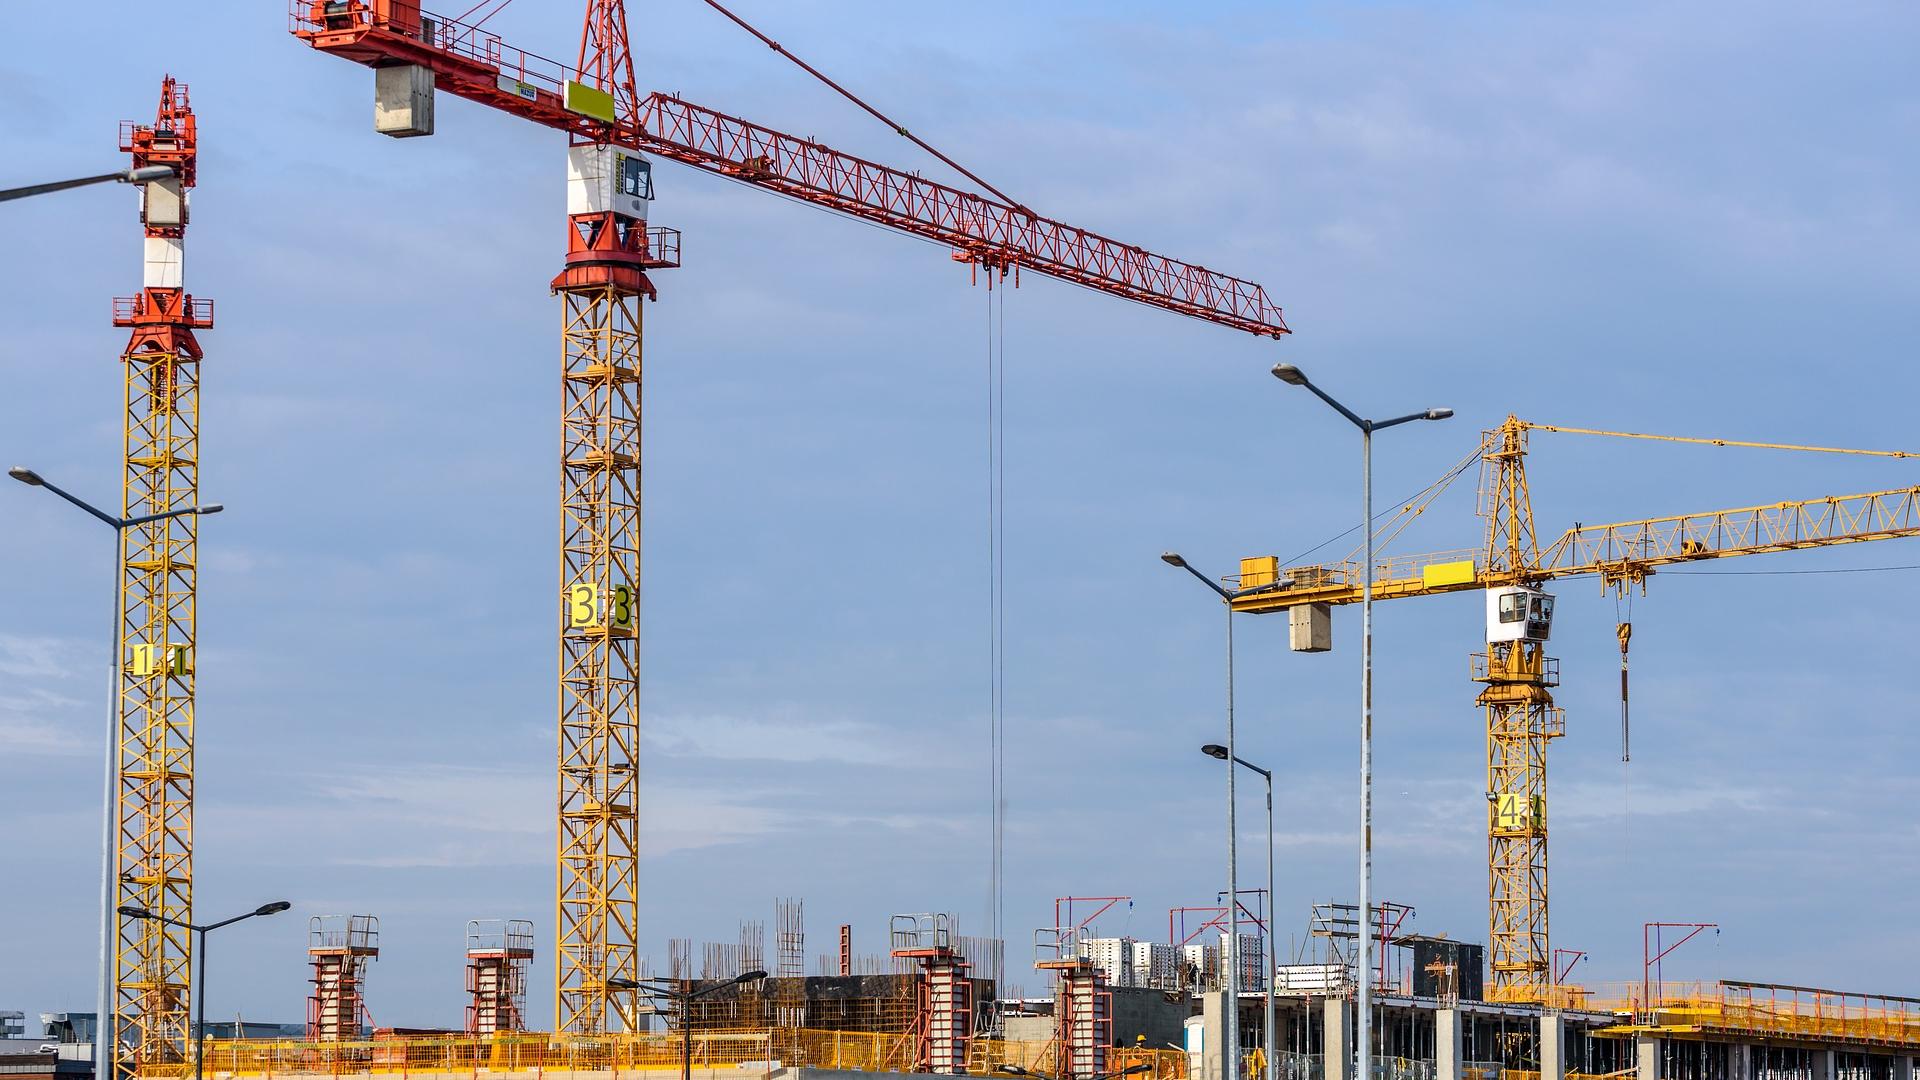 Building site with cranes